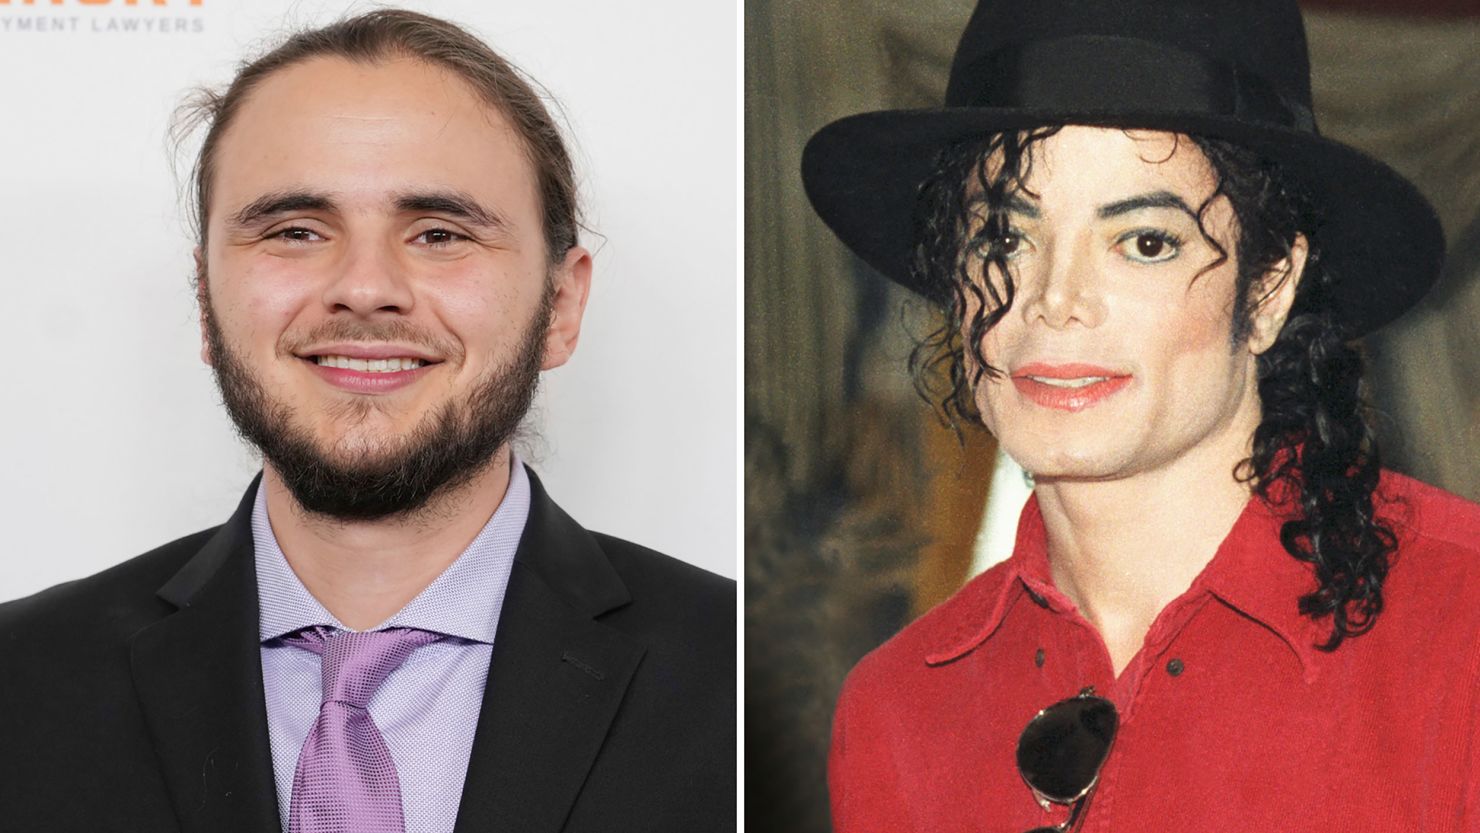 Prince Jackson says his father Michael Jackson felt insecure about